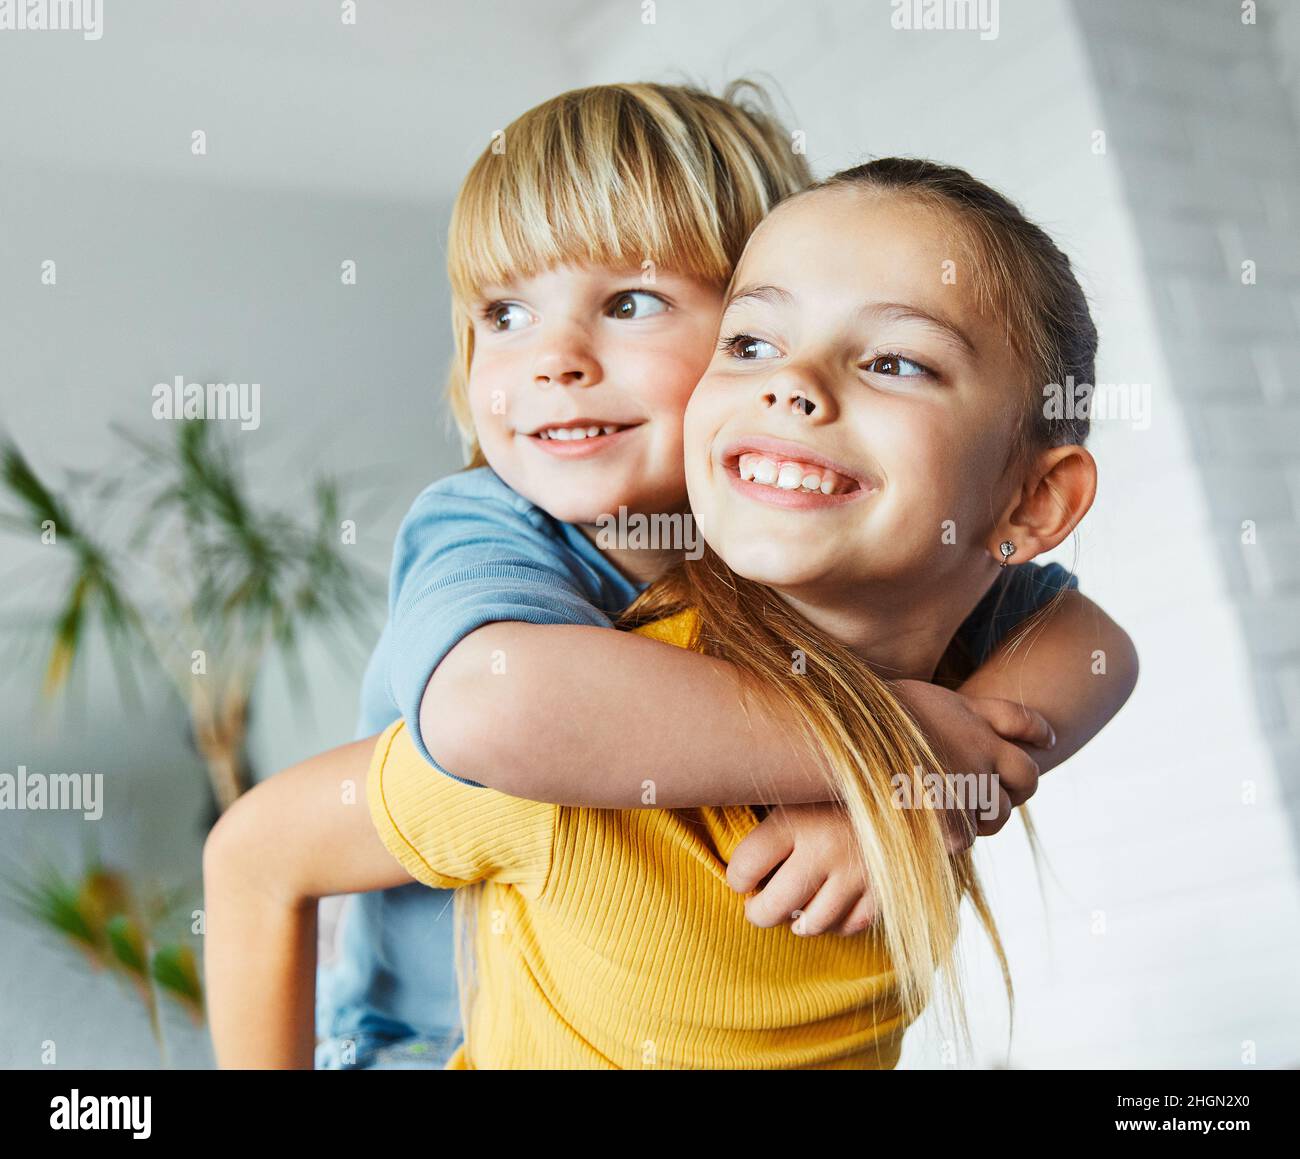 child girl boy childhood kid brother sister love family together fun happy joy happiness cute piggyback hugging embracing Stock Photo